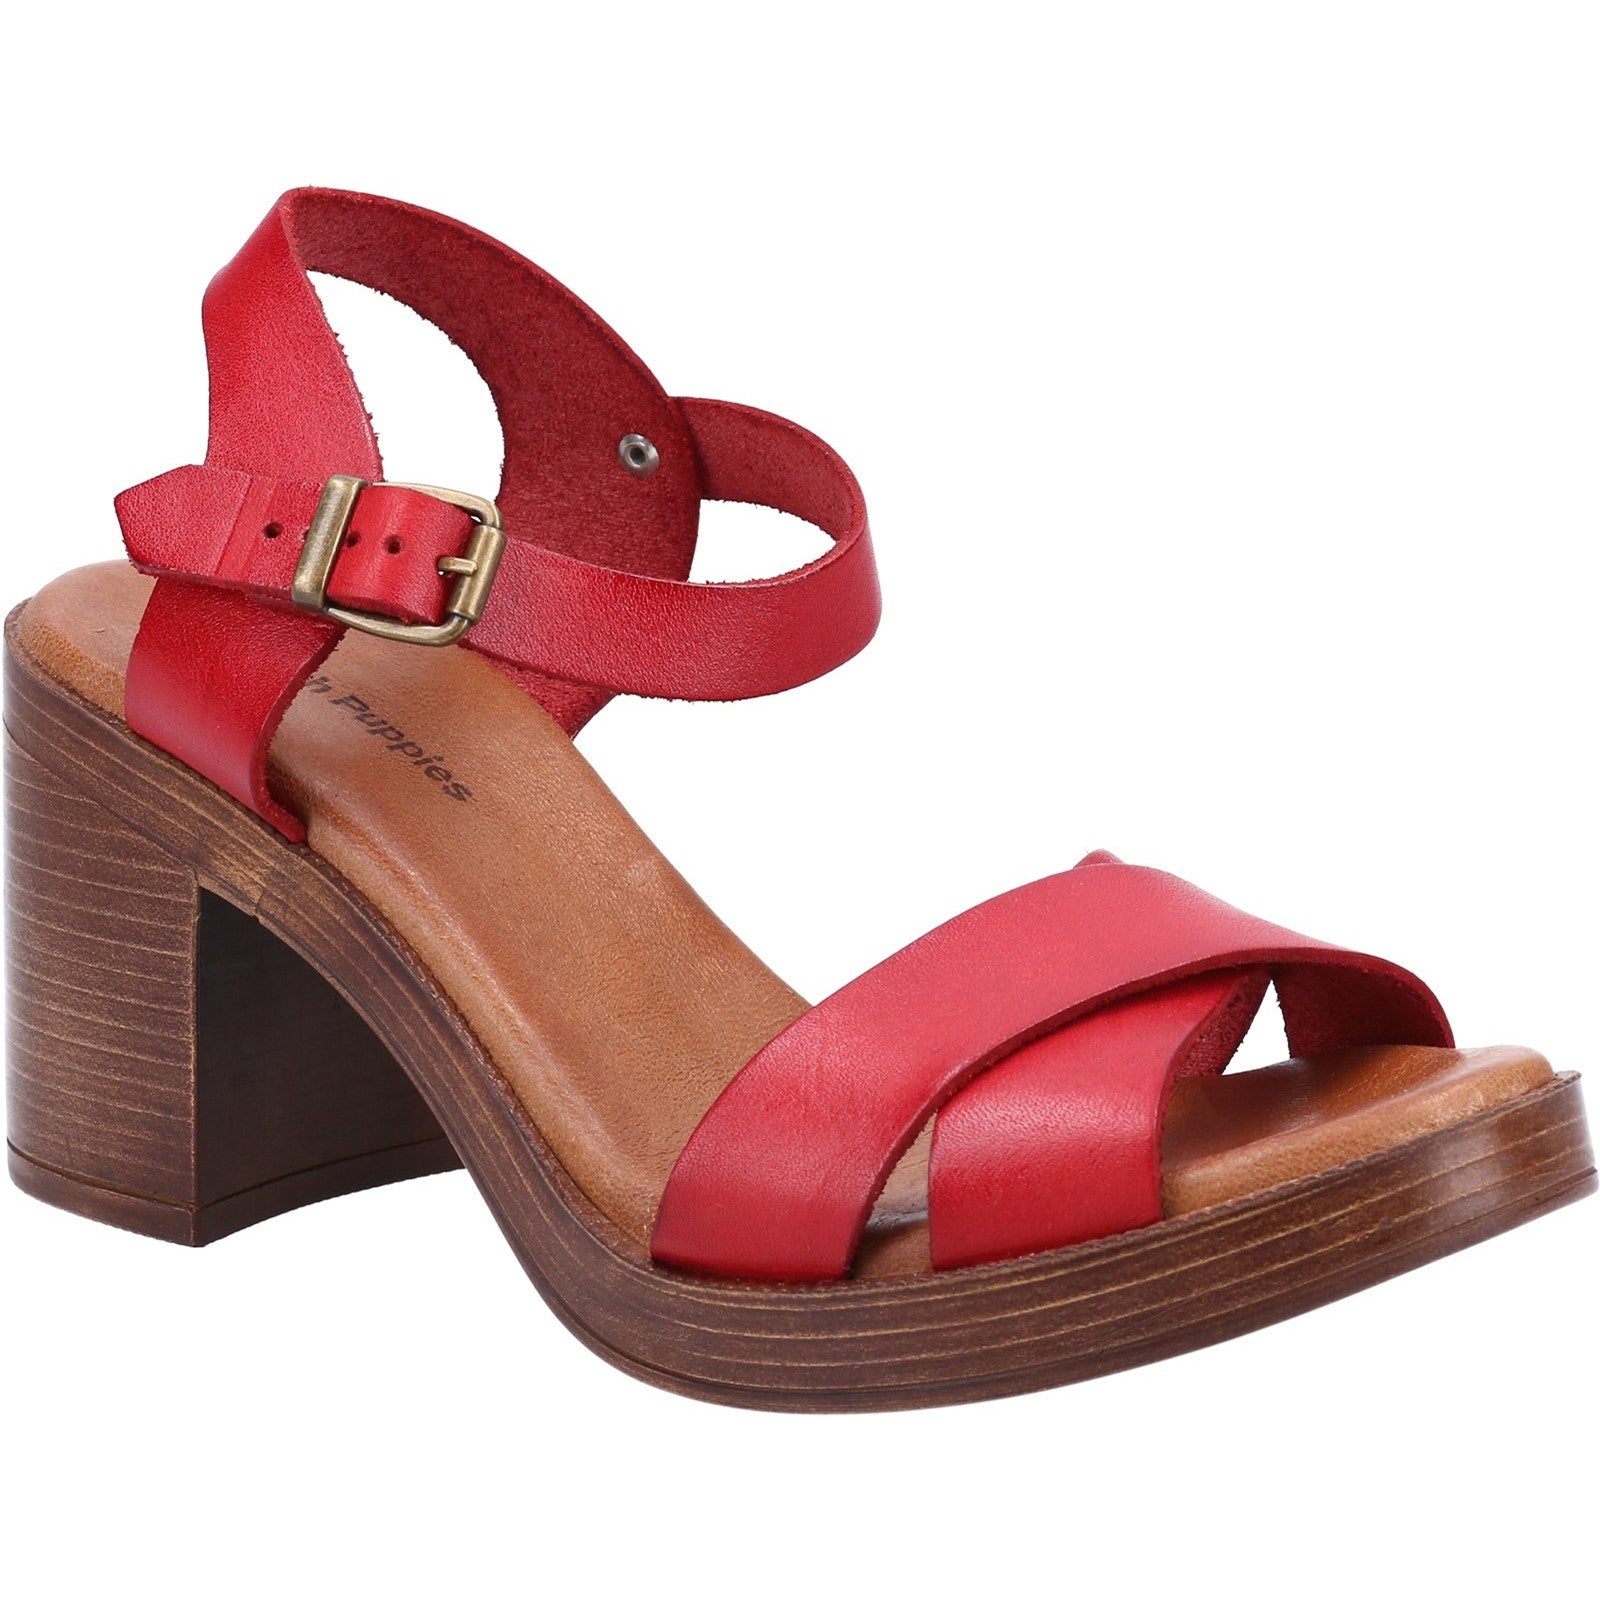 Hush Puppies Womens Georgia Leather Sandal - Red